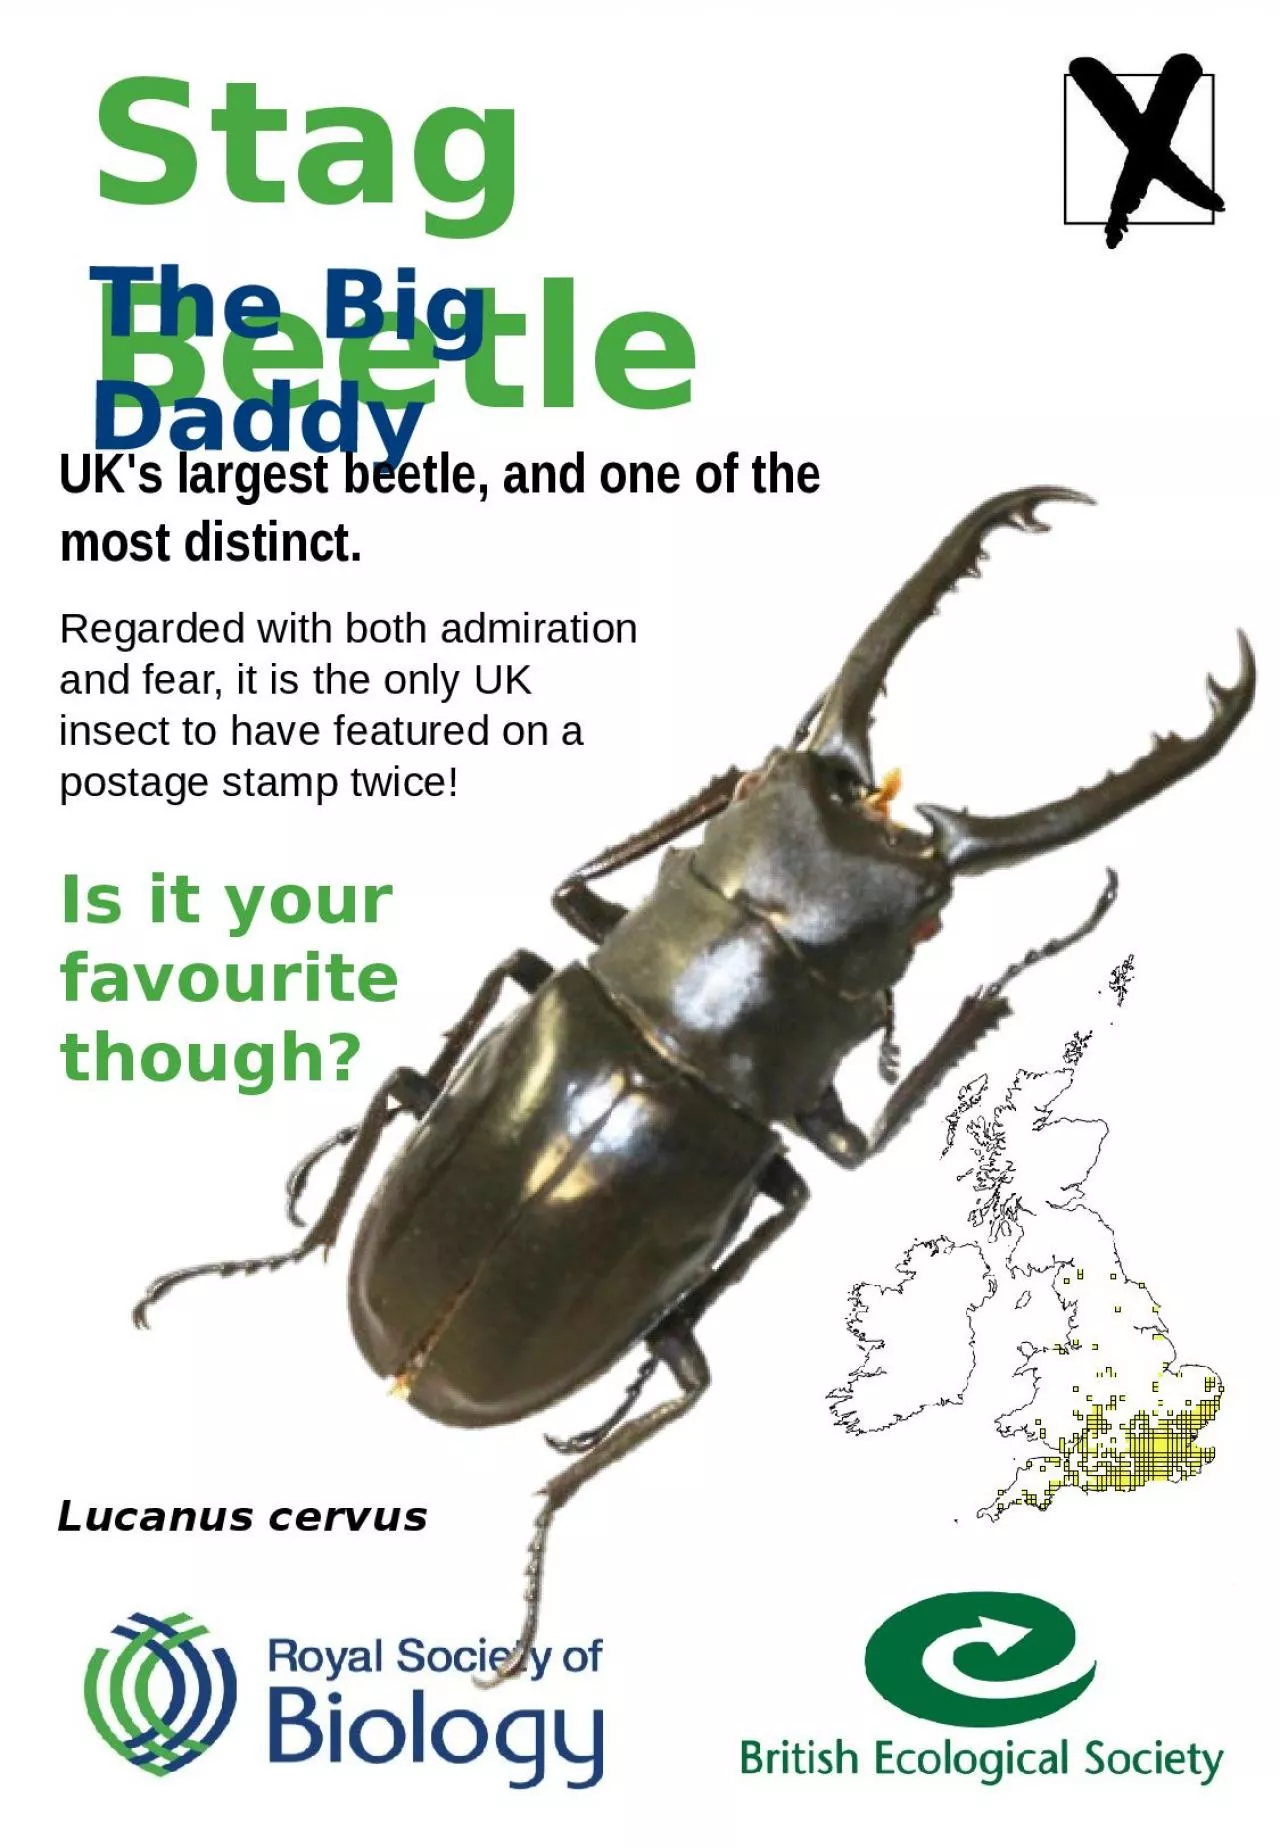 Stag Beetle The Big Daddy